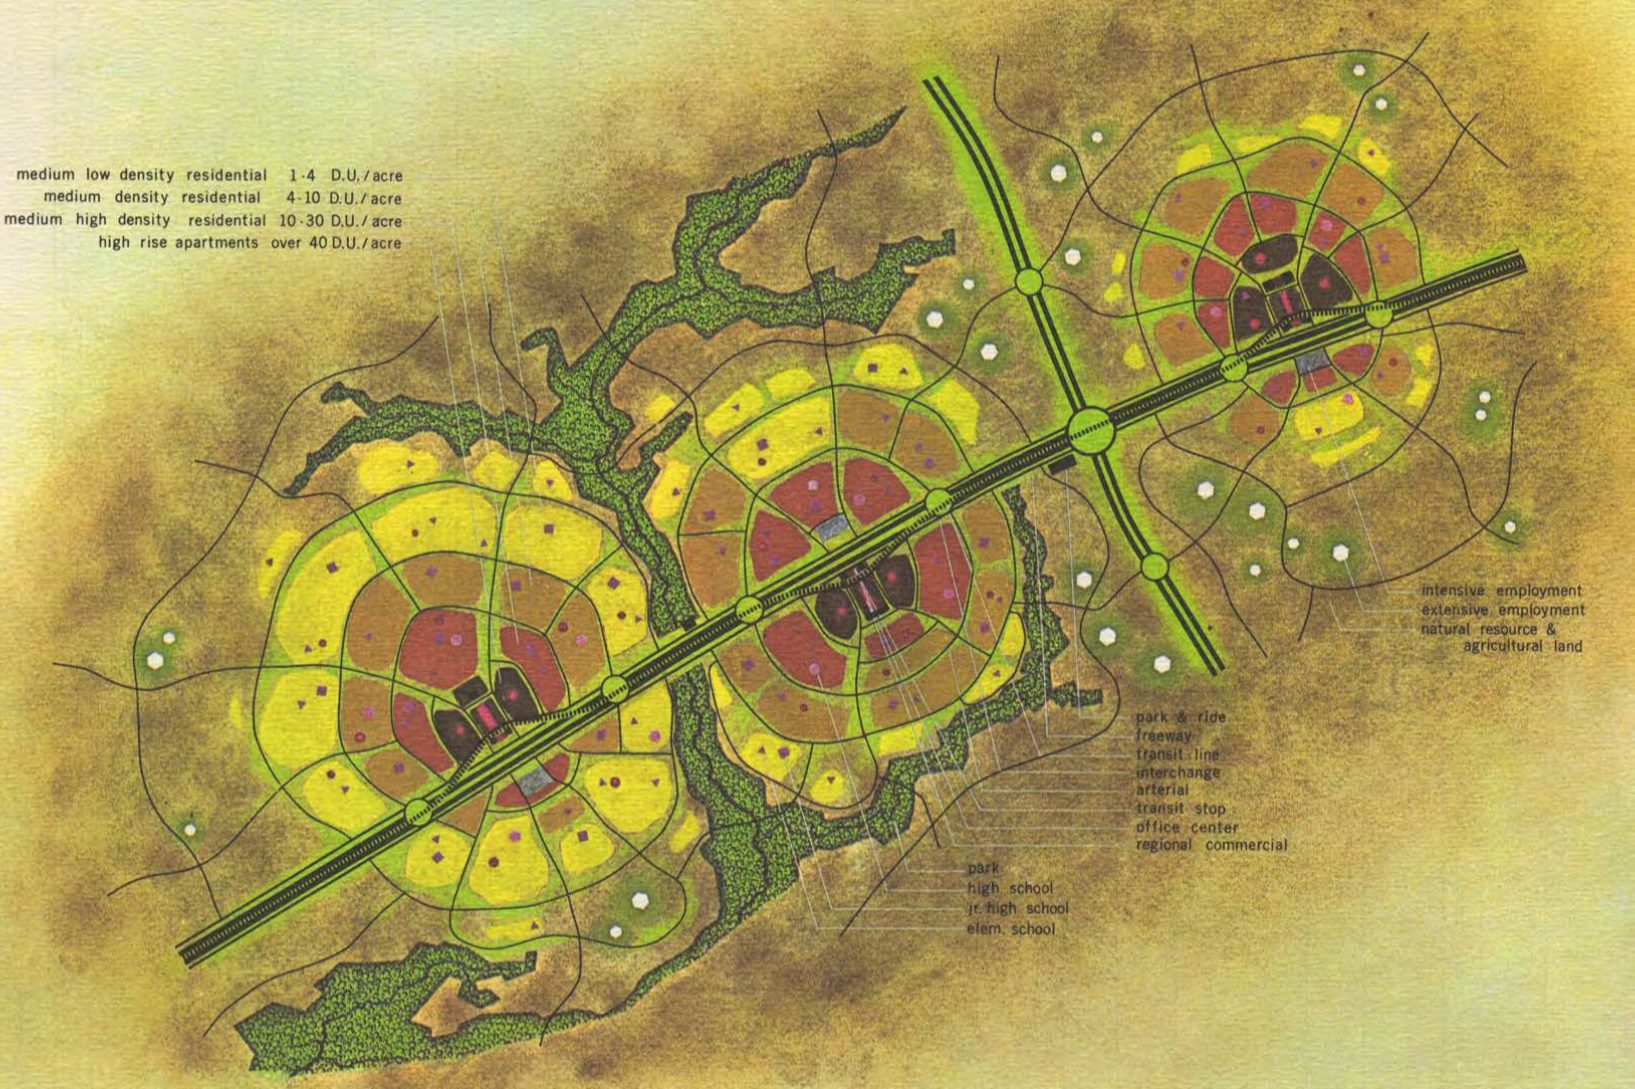 An image from the 1964 General Plan of Wedges and Corridors. It show a conceptual plan of corridor cities along a corridor. Each corridor city was laid out in a cirle of approximatley two-mile radius with commercail, institutional and hihg-density residential developments in the center transitioning down to lowest densities, open spaces and farms at the edges.